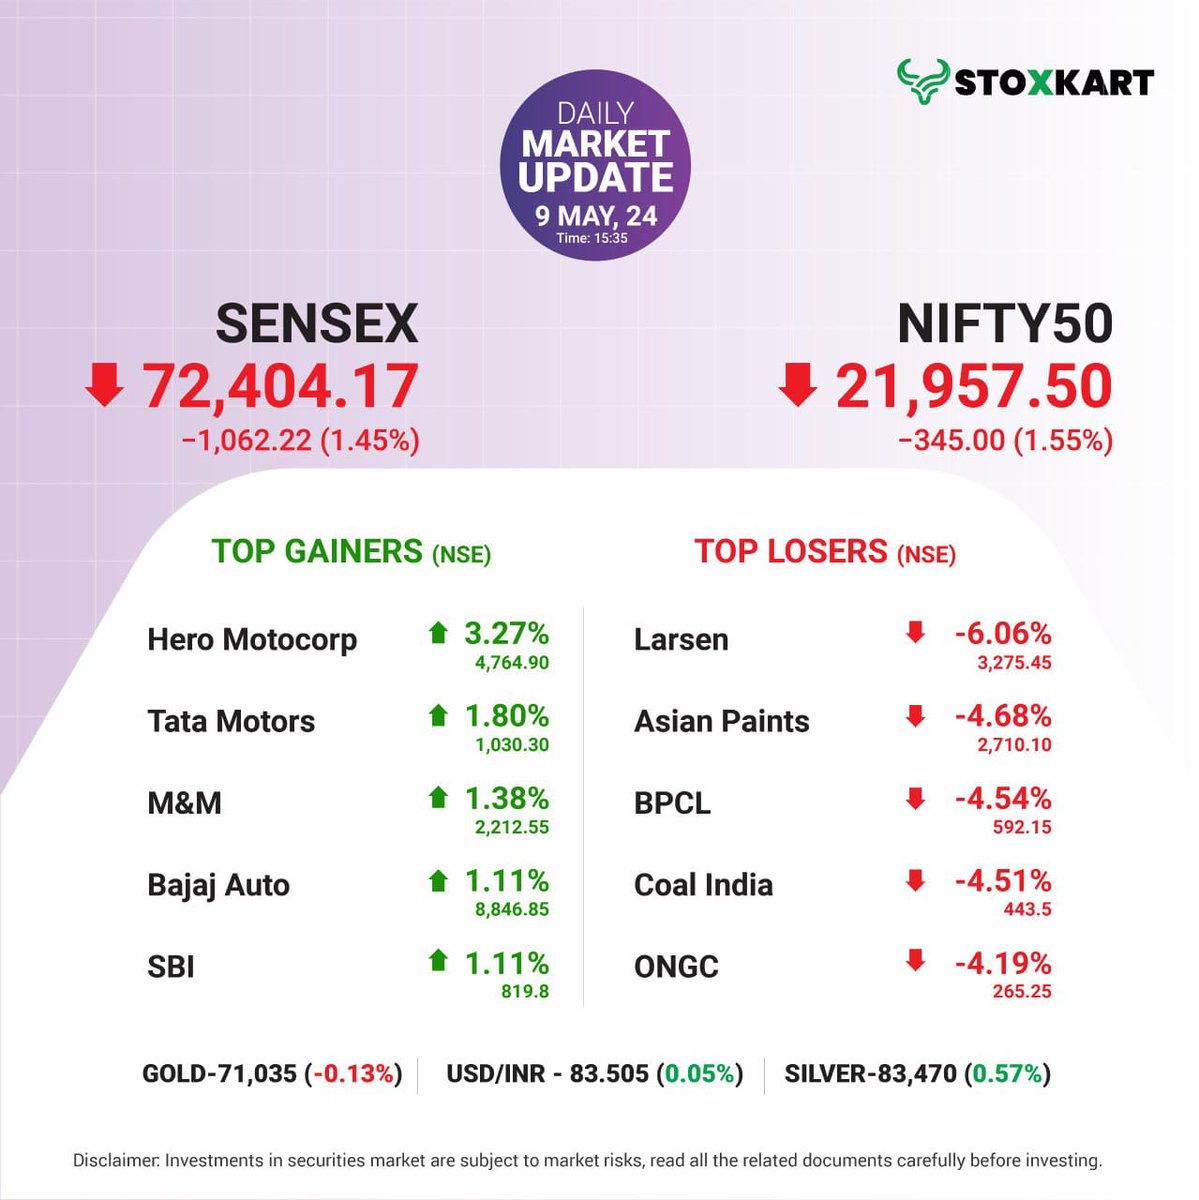 #dailymarketupdate
Featuring today’s market performance, focusing on the Nifty 50 index’s top 5 gainers and top 5 losers. Have you invested in any of these stocks? Share your thoughts in the comments section! #stoxkart #stoxkartapp #tradewithstoxkart #investwithstoxkart